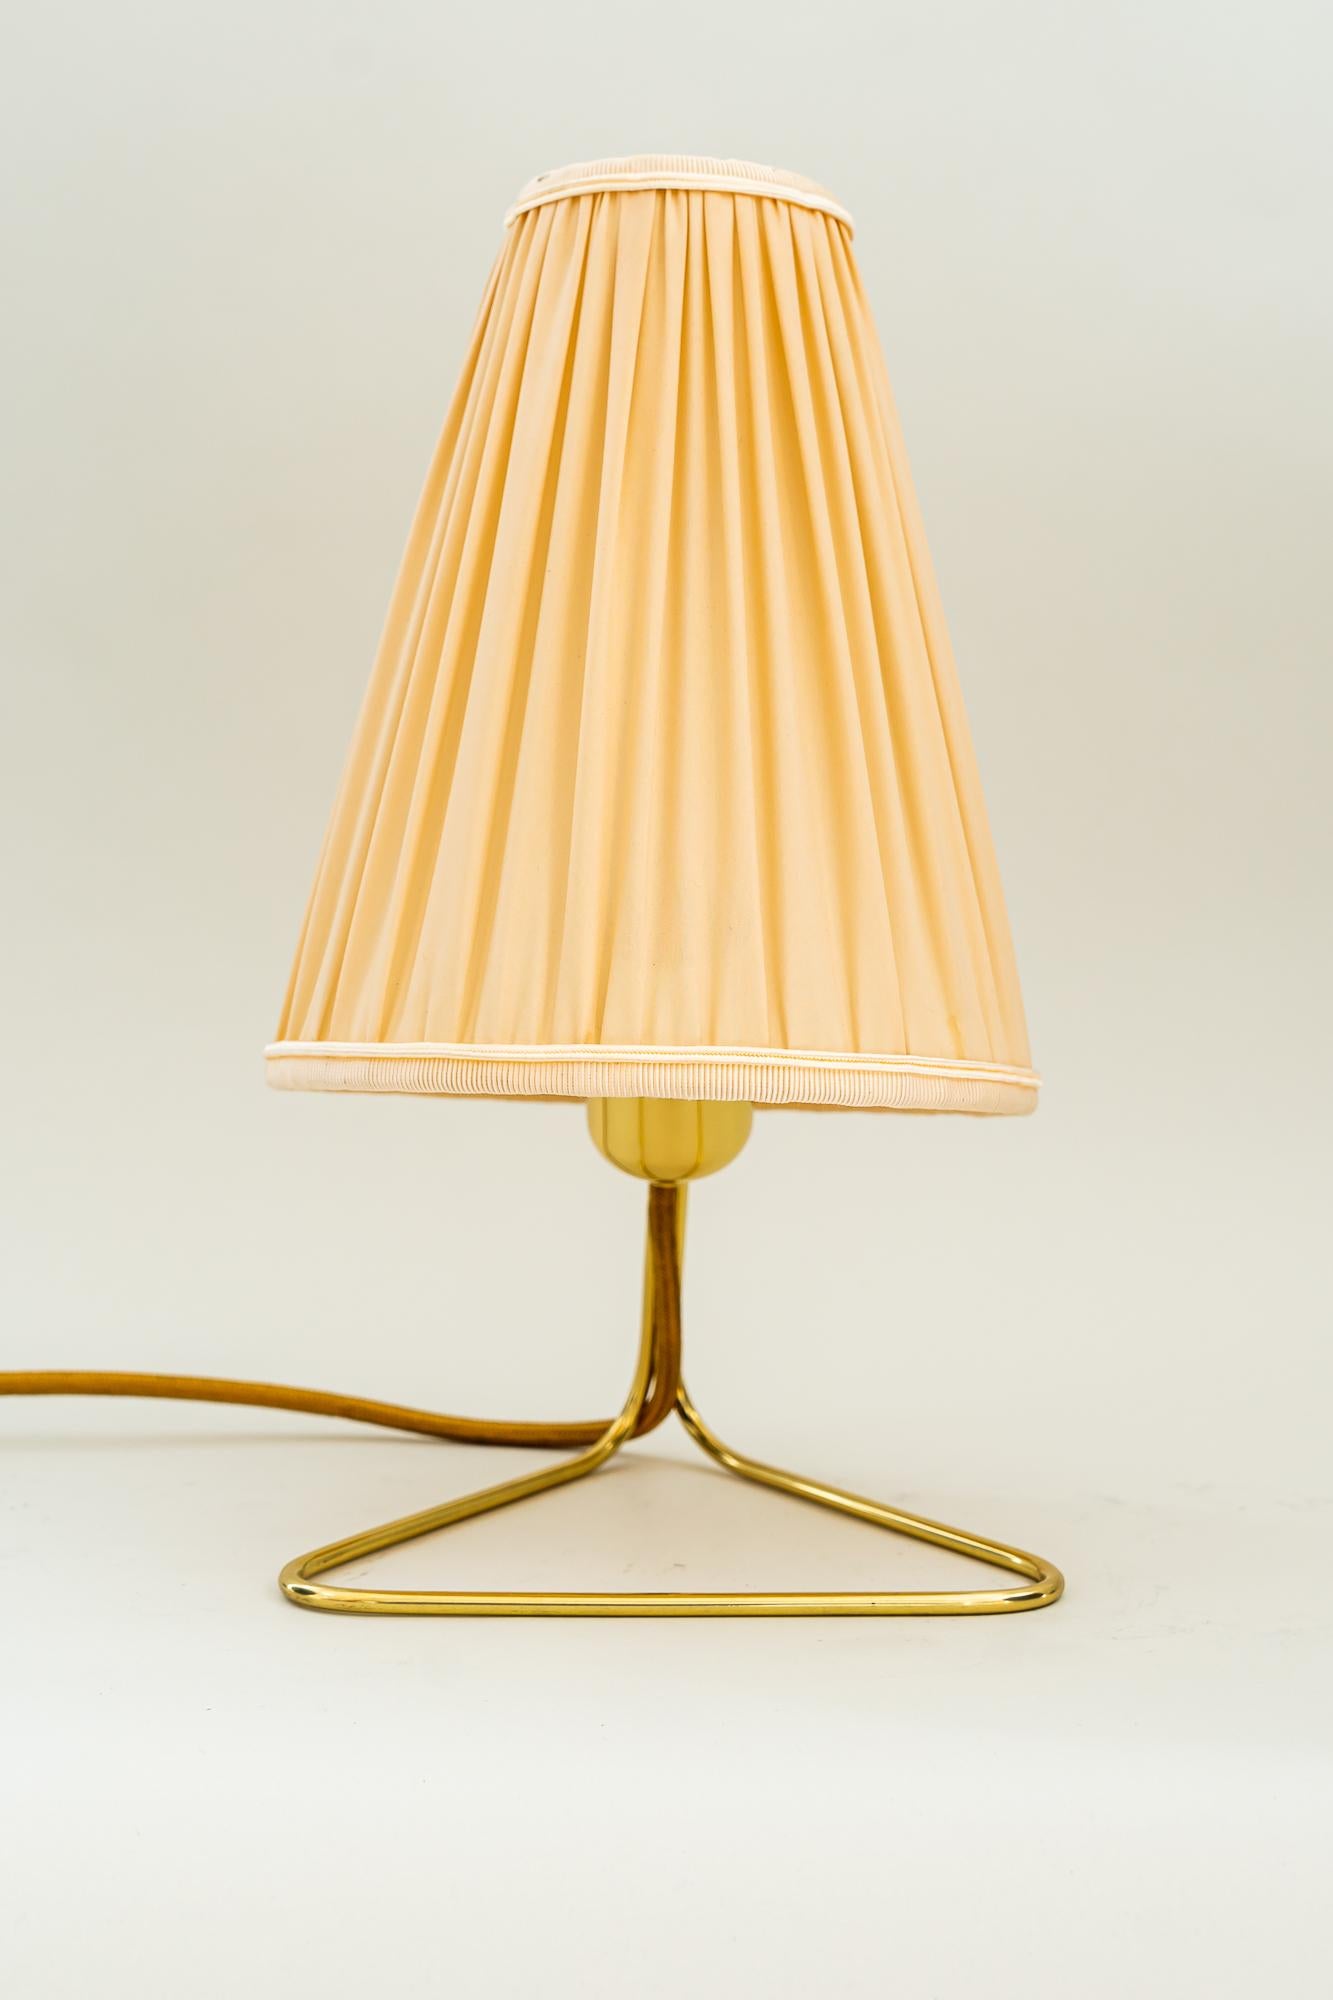 Rupert nikoll table lamp Vienna around 1950s
Polished and stove enamelled
The fabric shade is replaced ( new ).